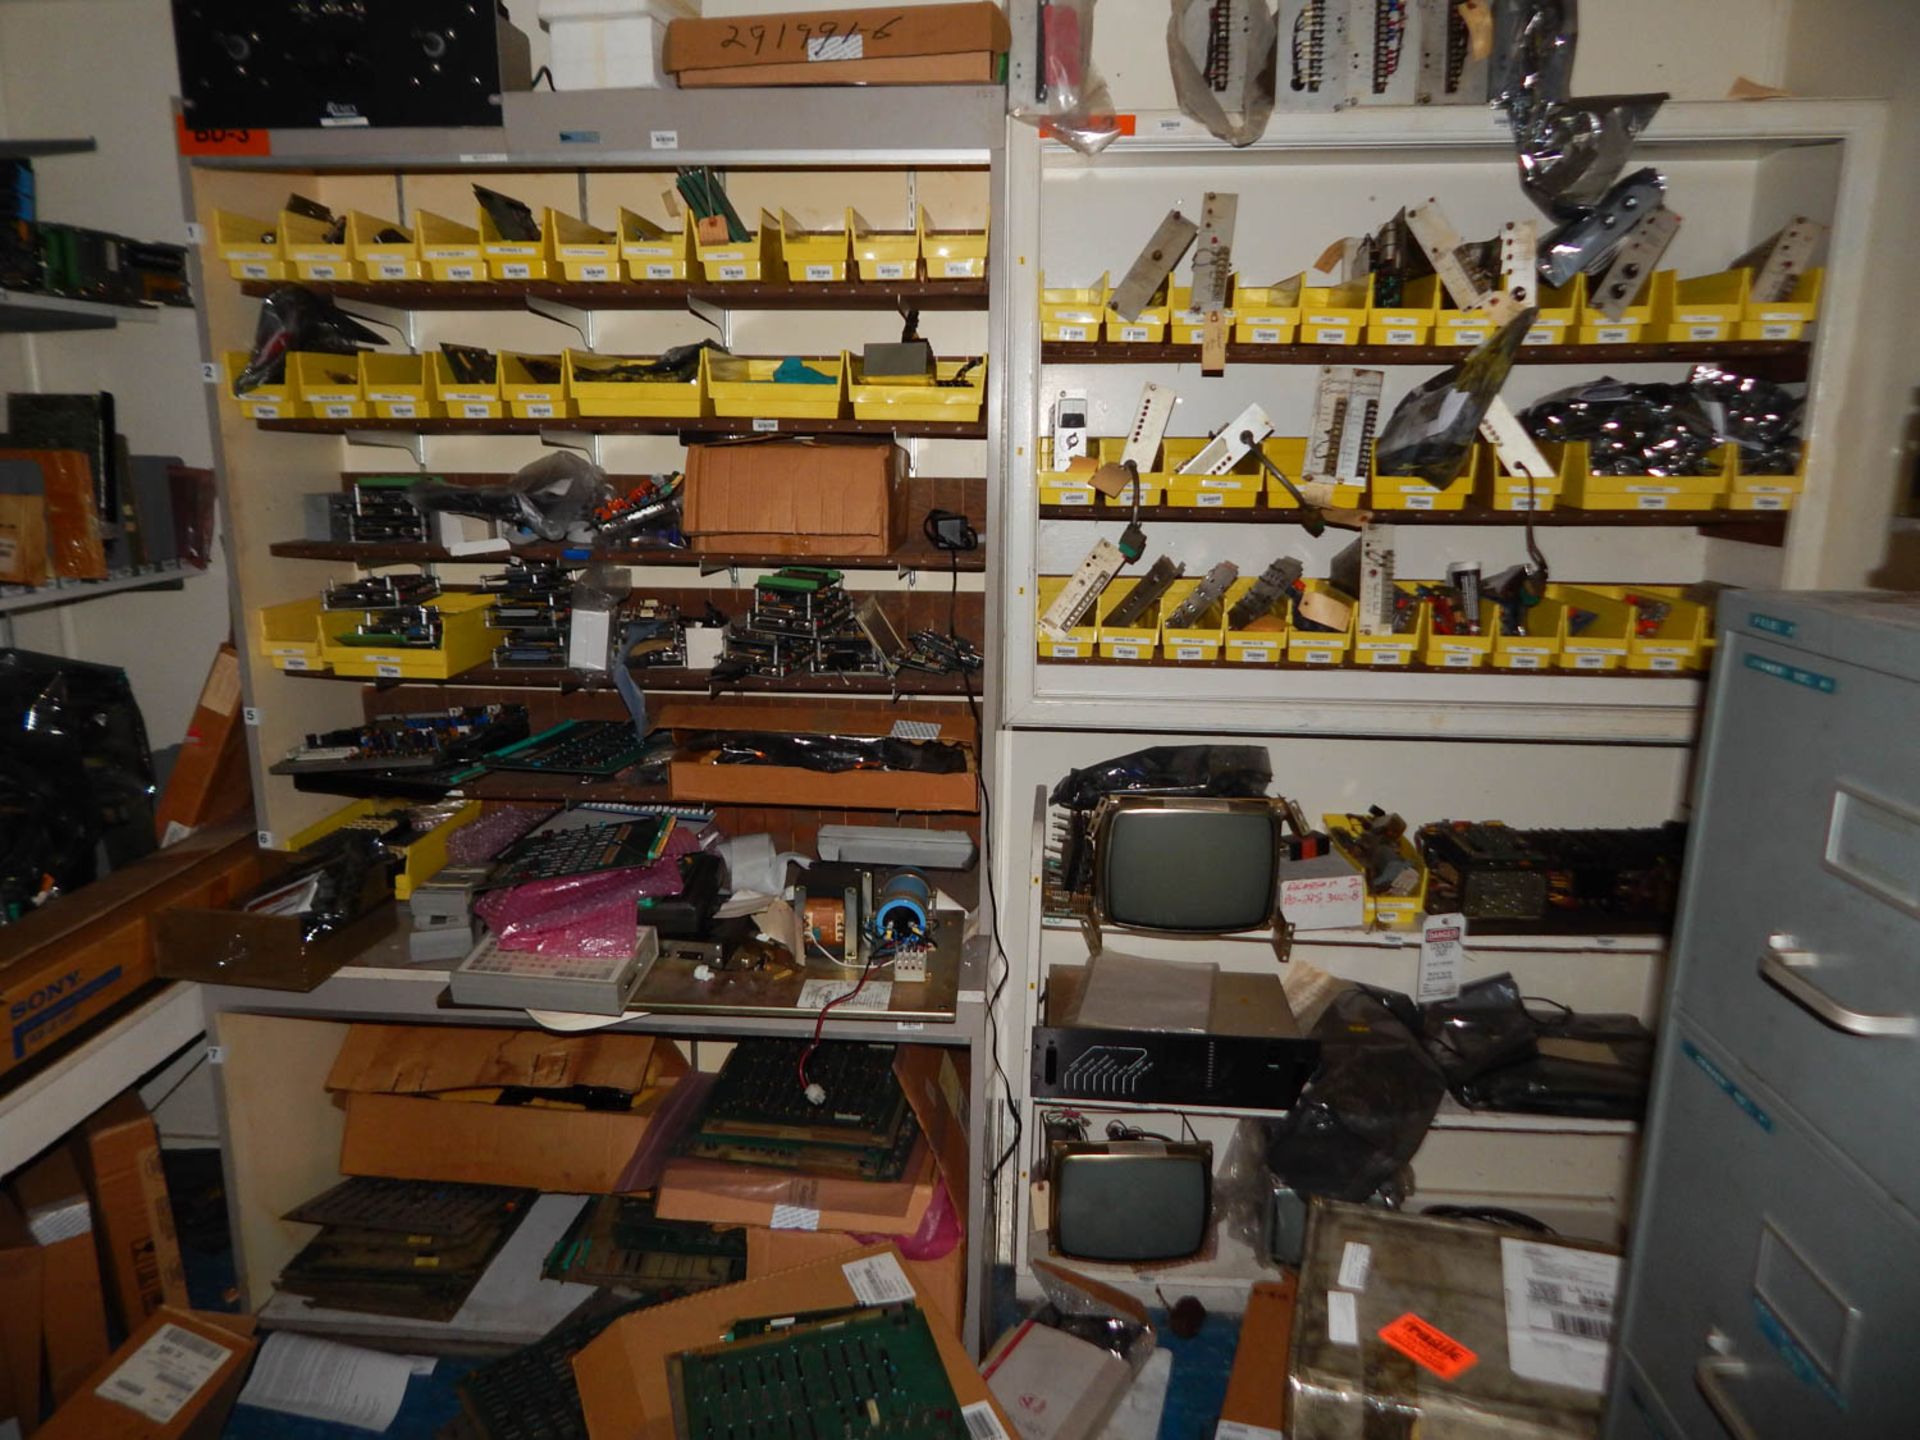 CONTENTS OF ROOM, INCLUDING: PC BOARDS FOR MACHINES, SHELVING, CABINETS, MONITORS, ETC. - Image 2 of 4